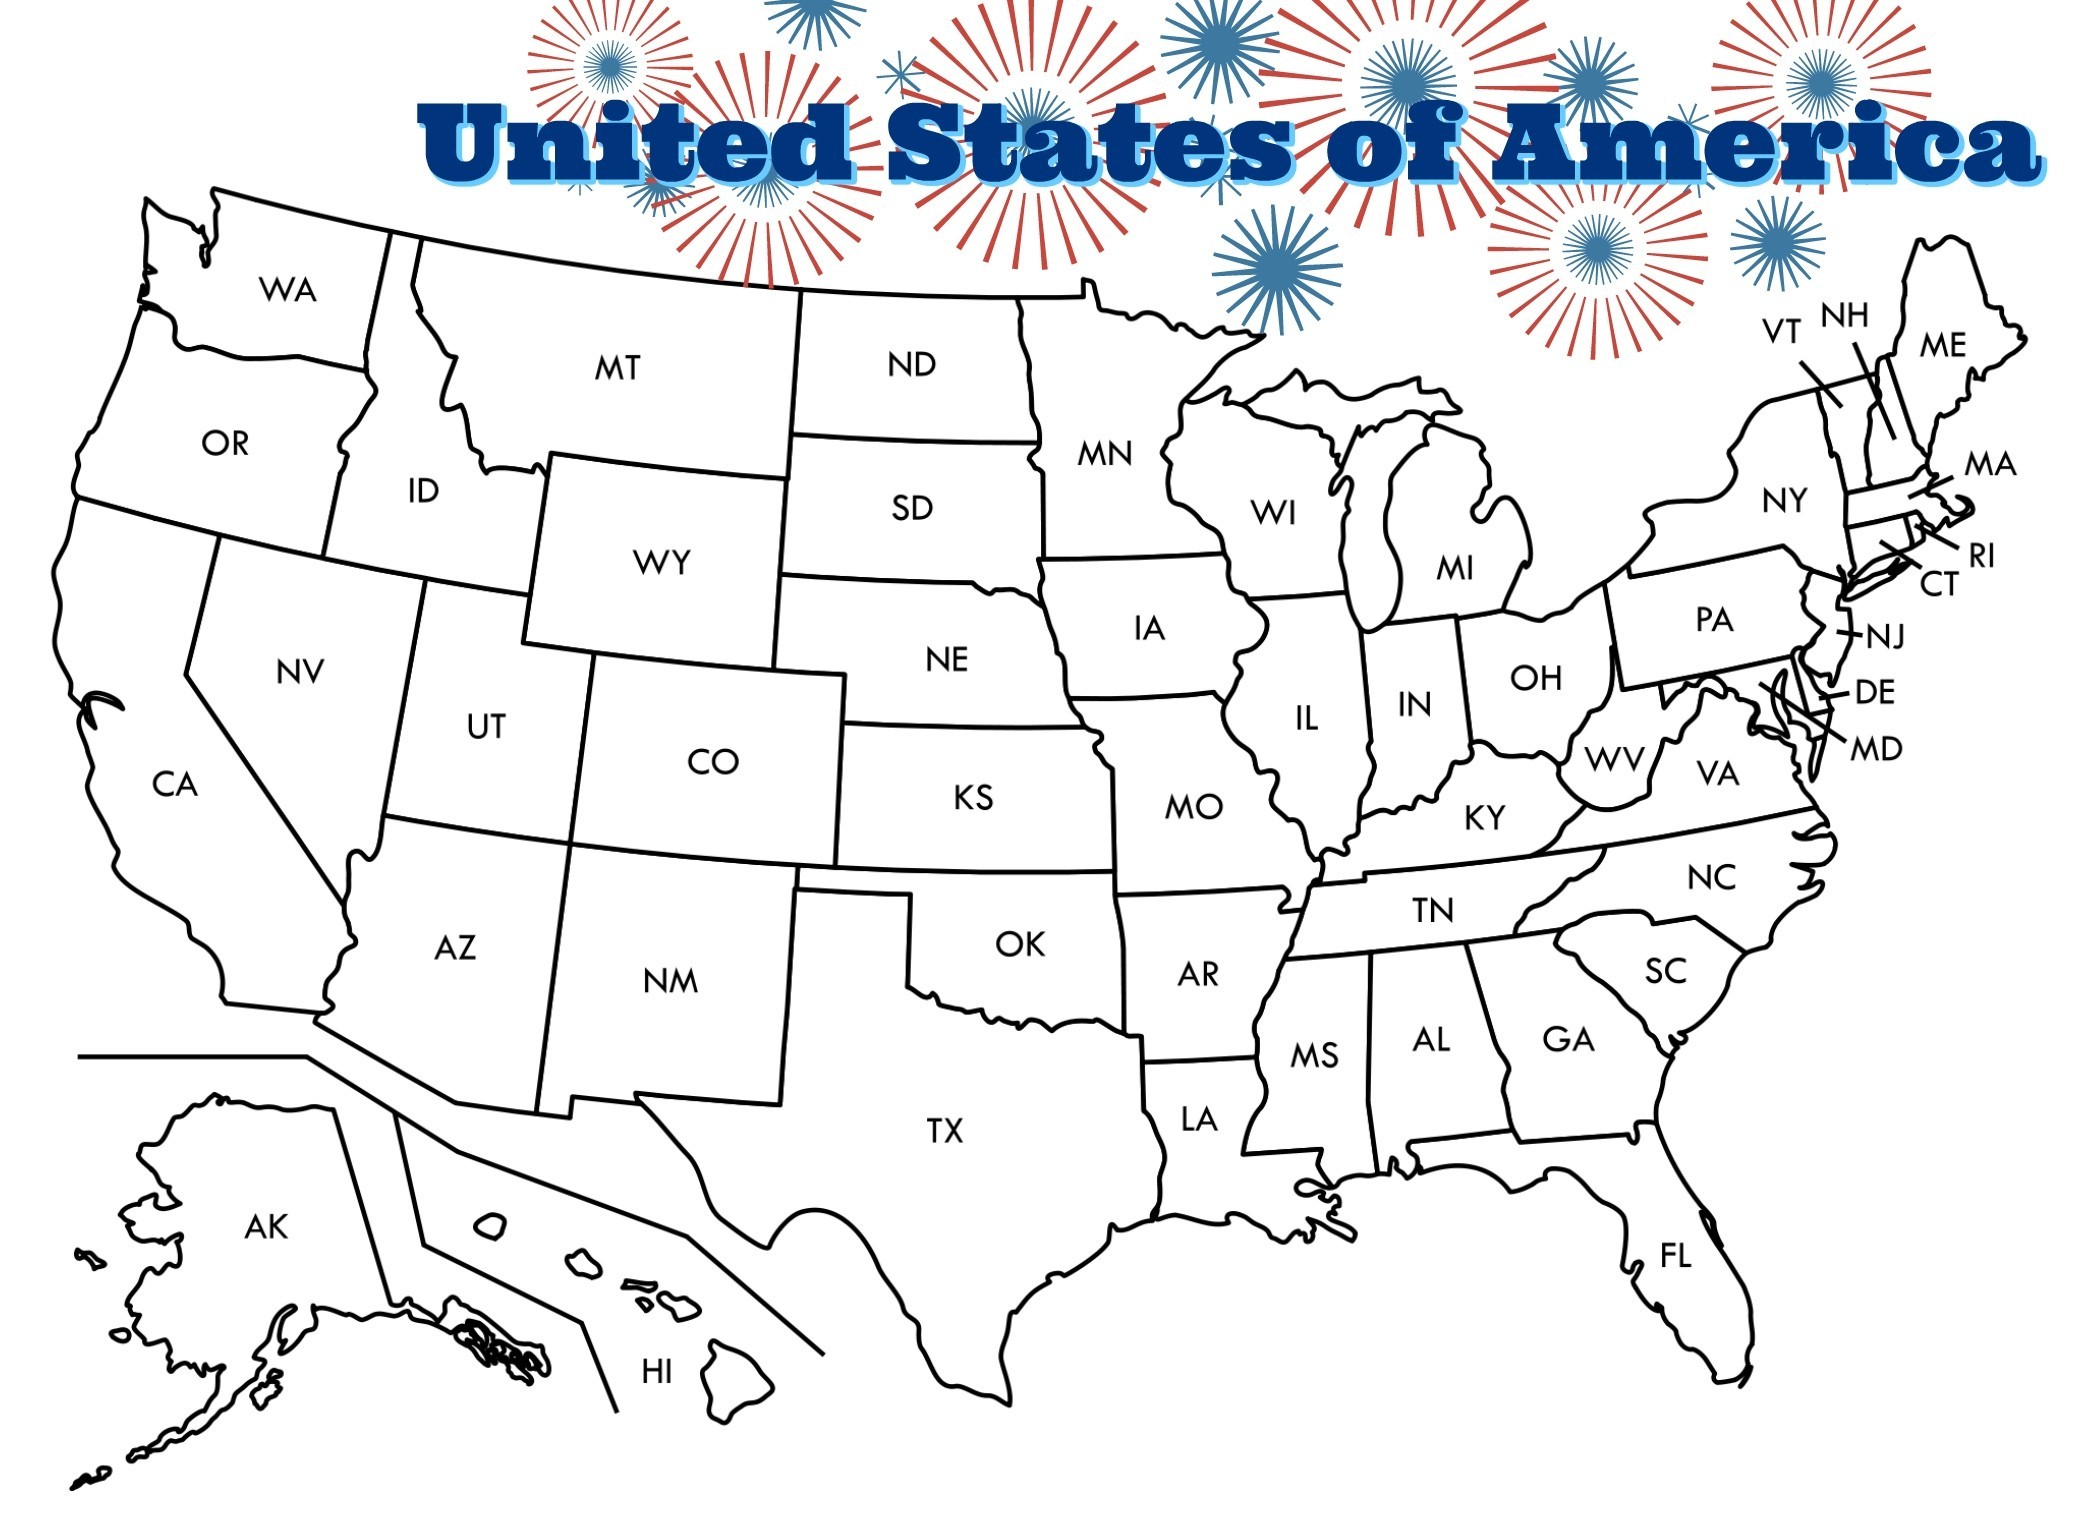 free united states map coloring page Us Map Coloring Pages Best Coloring Pages For Kids free united states map coloring page